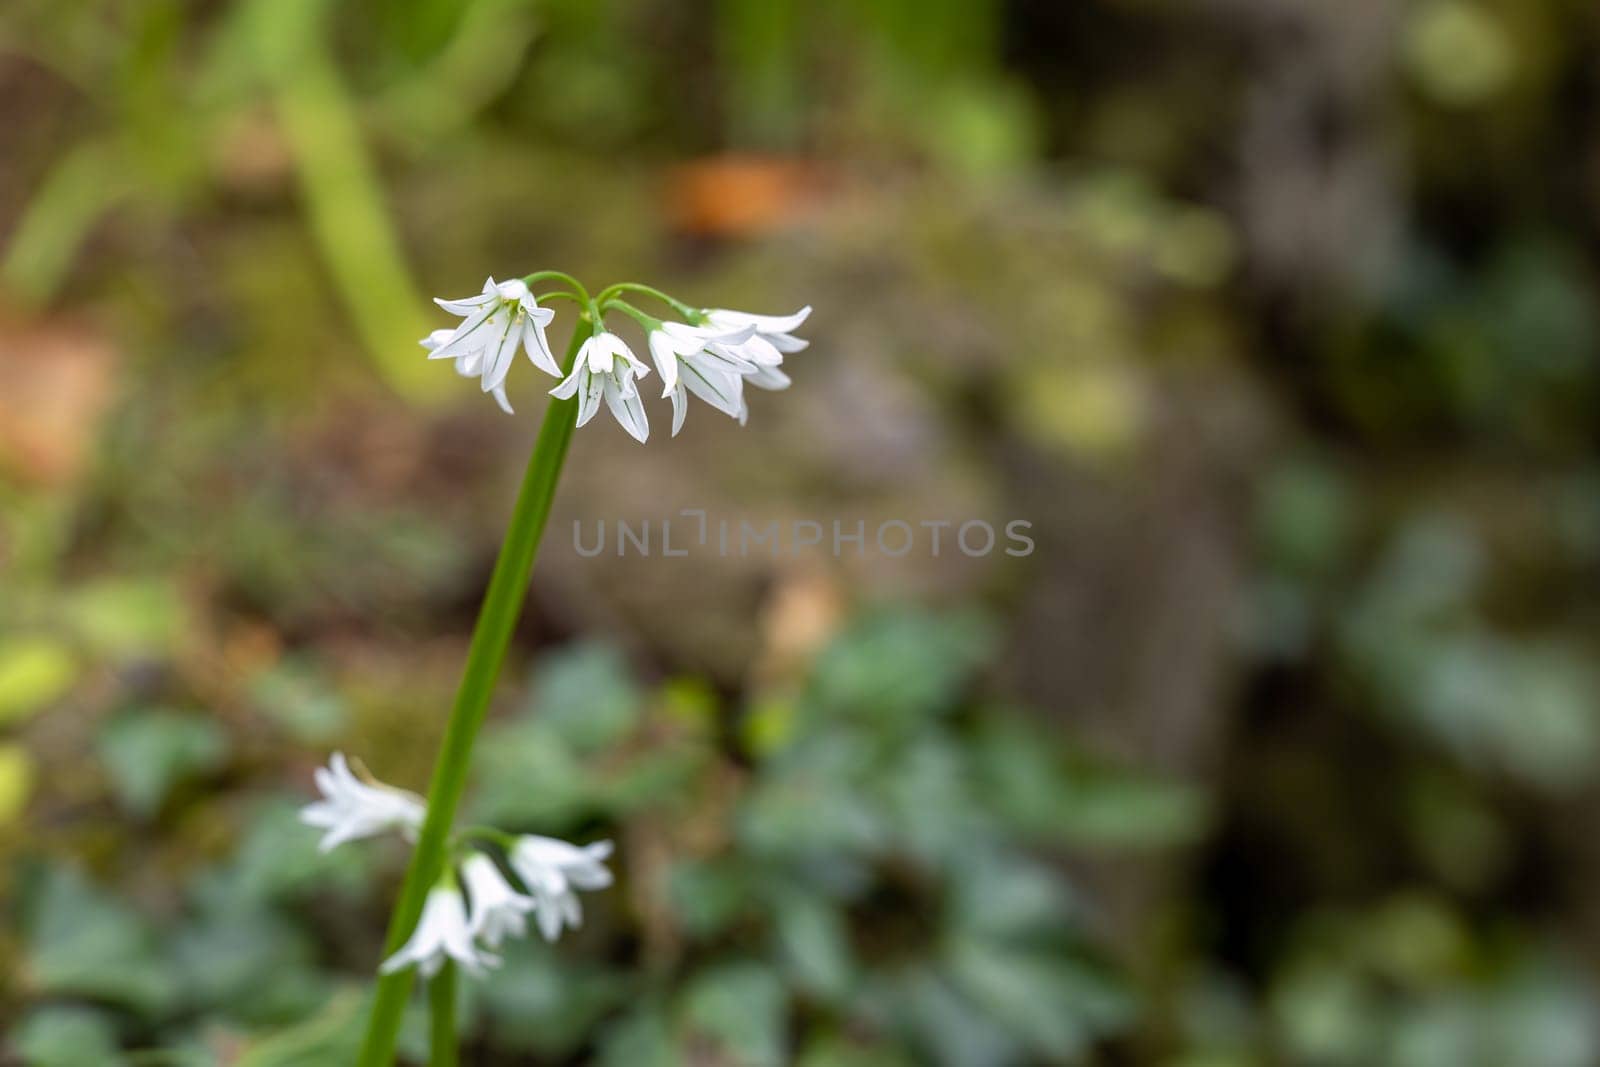 Closeup of white garlic flowers blooming on a stem in a natural outdoor setting by exndiver